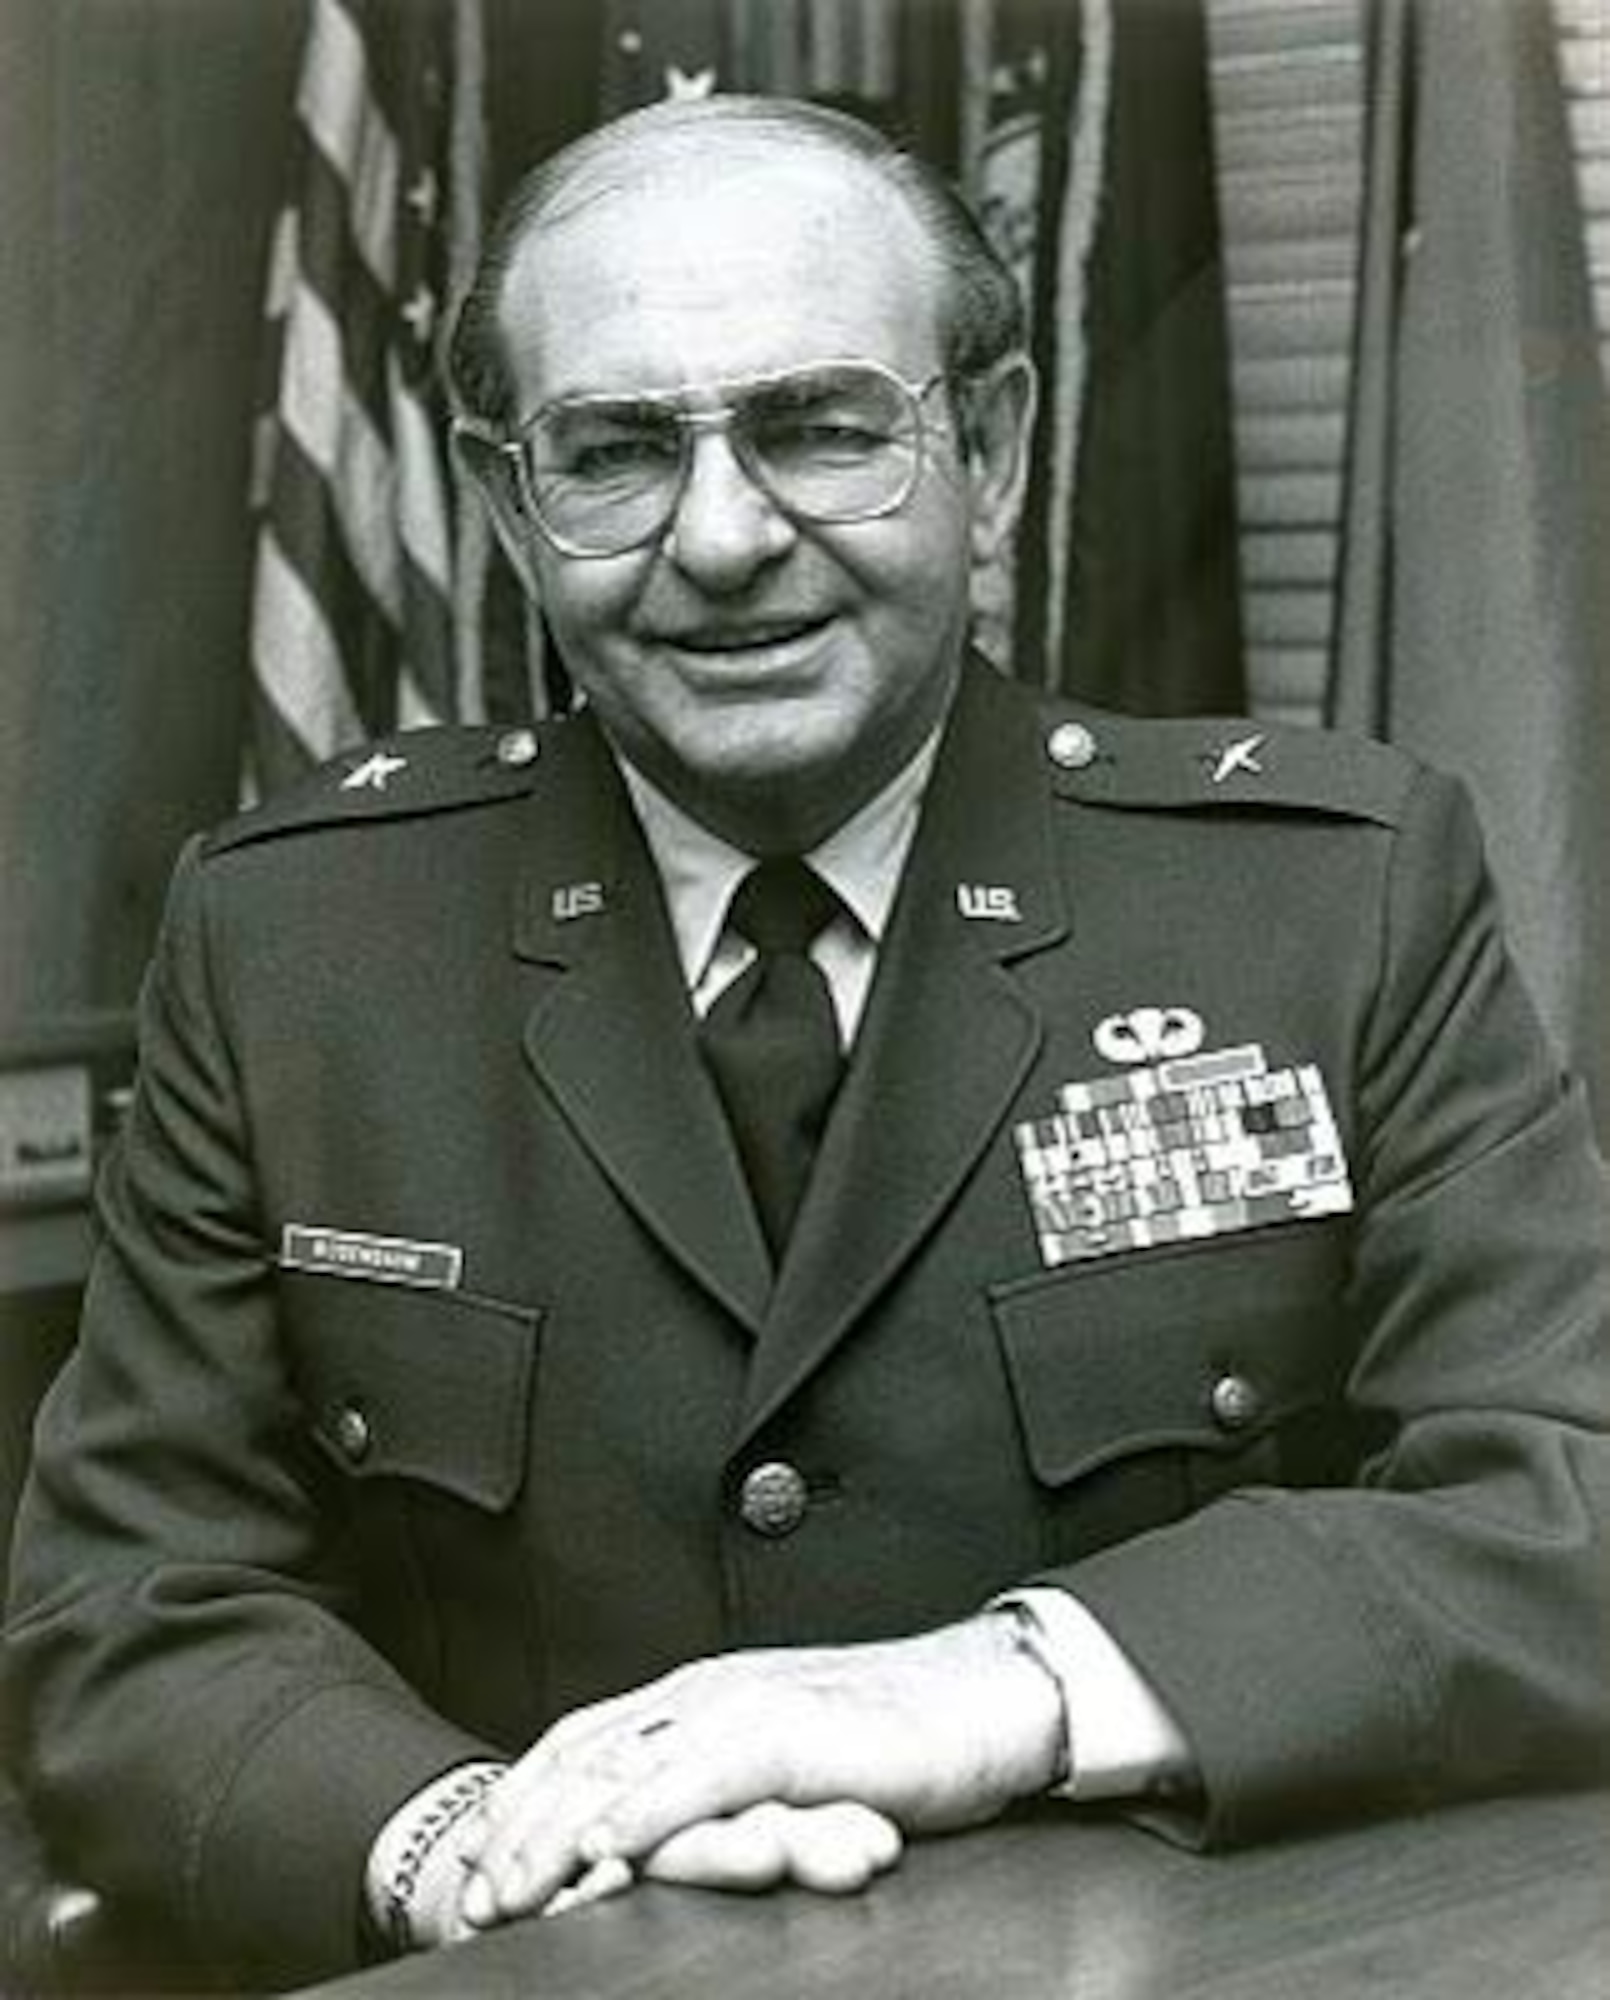 Brig. Gen. Fred Rosenbaum, photo circa 1980, escaped Nazi oppression in Europe and later served on active duty with the U.S. Army, and later in the Oregon and Washington Army National Guards, and the Oregon Air National Guard. (Courtesy Gazing at the Flag Blog/142nd Fighter Wing History)